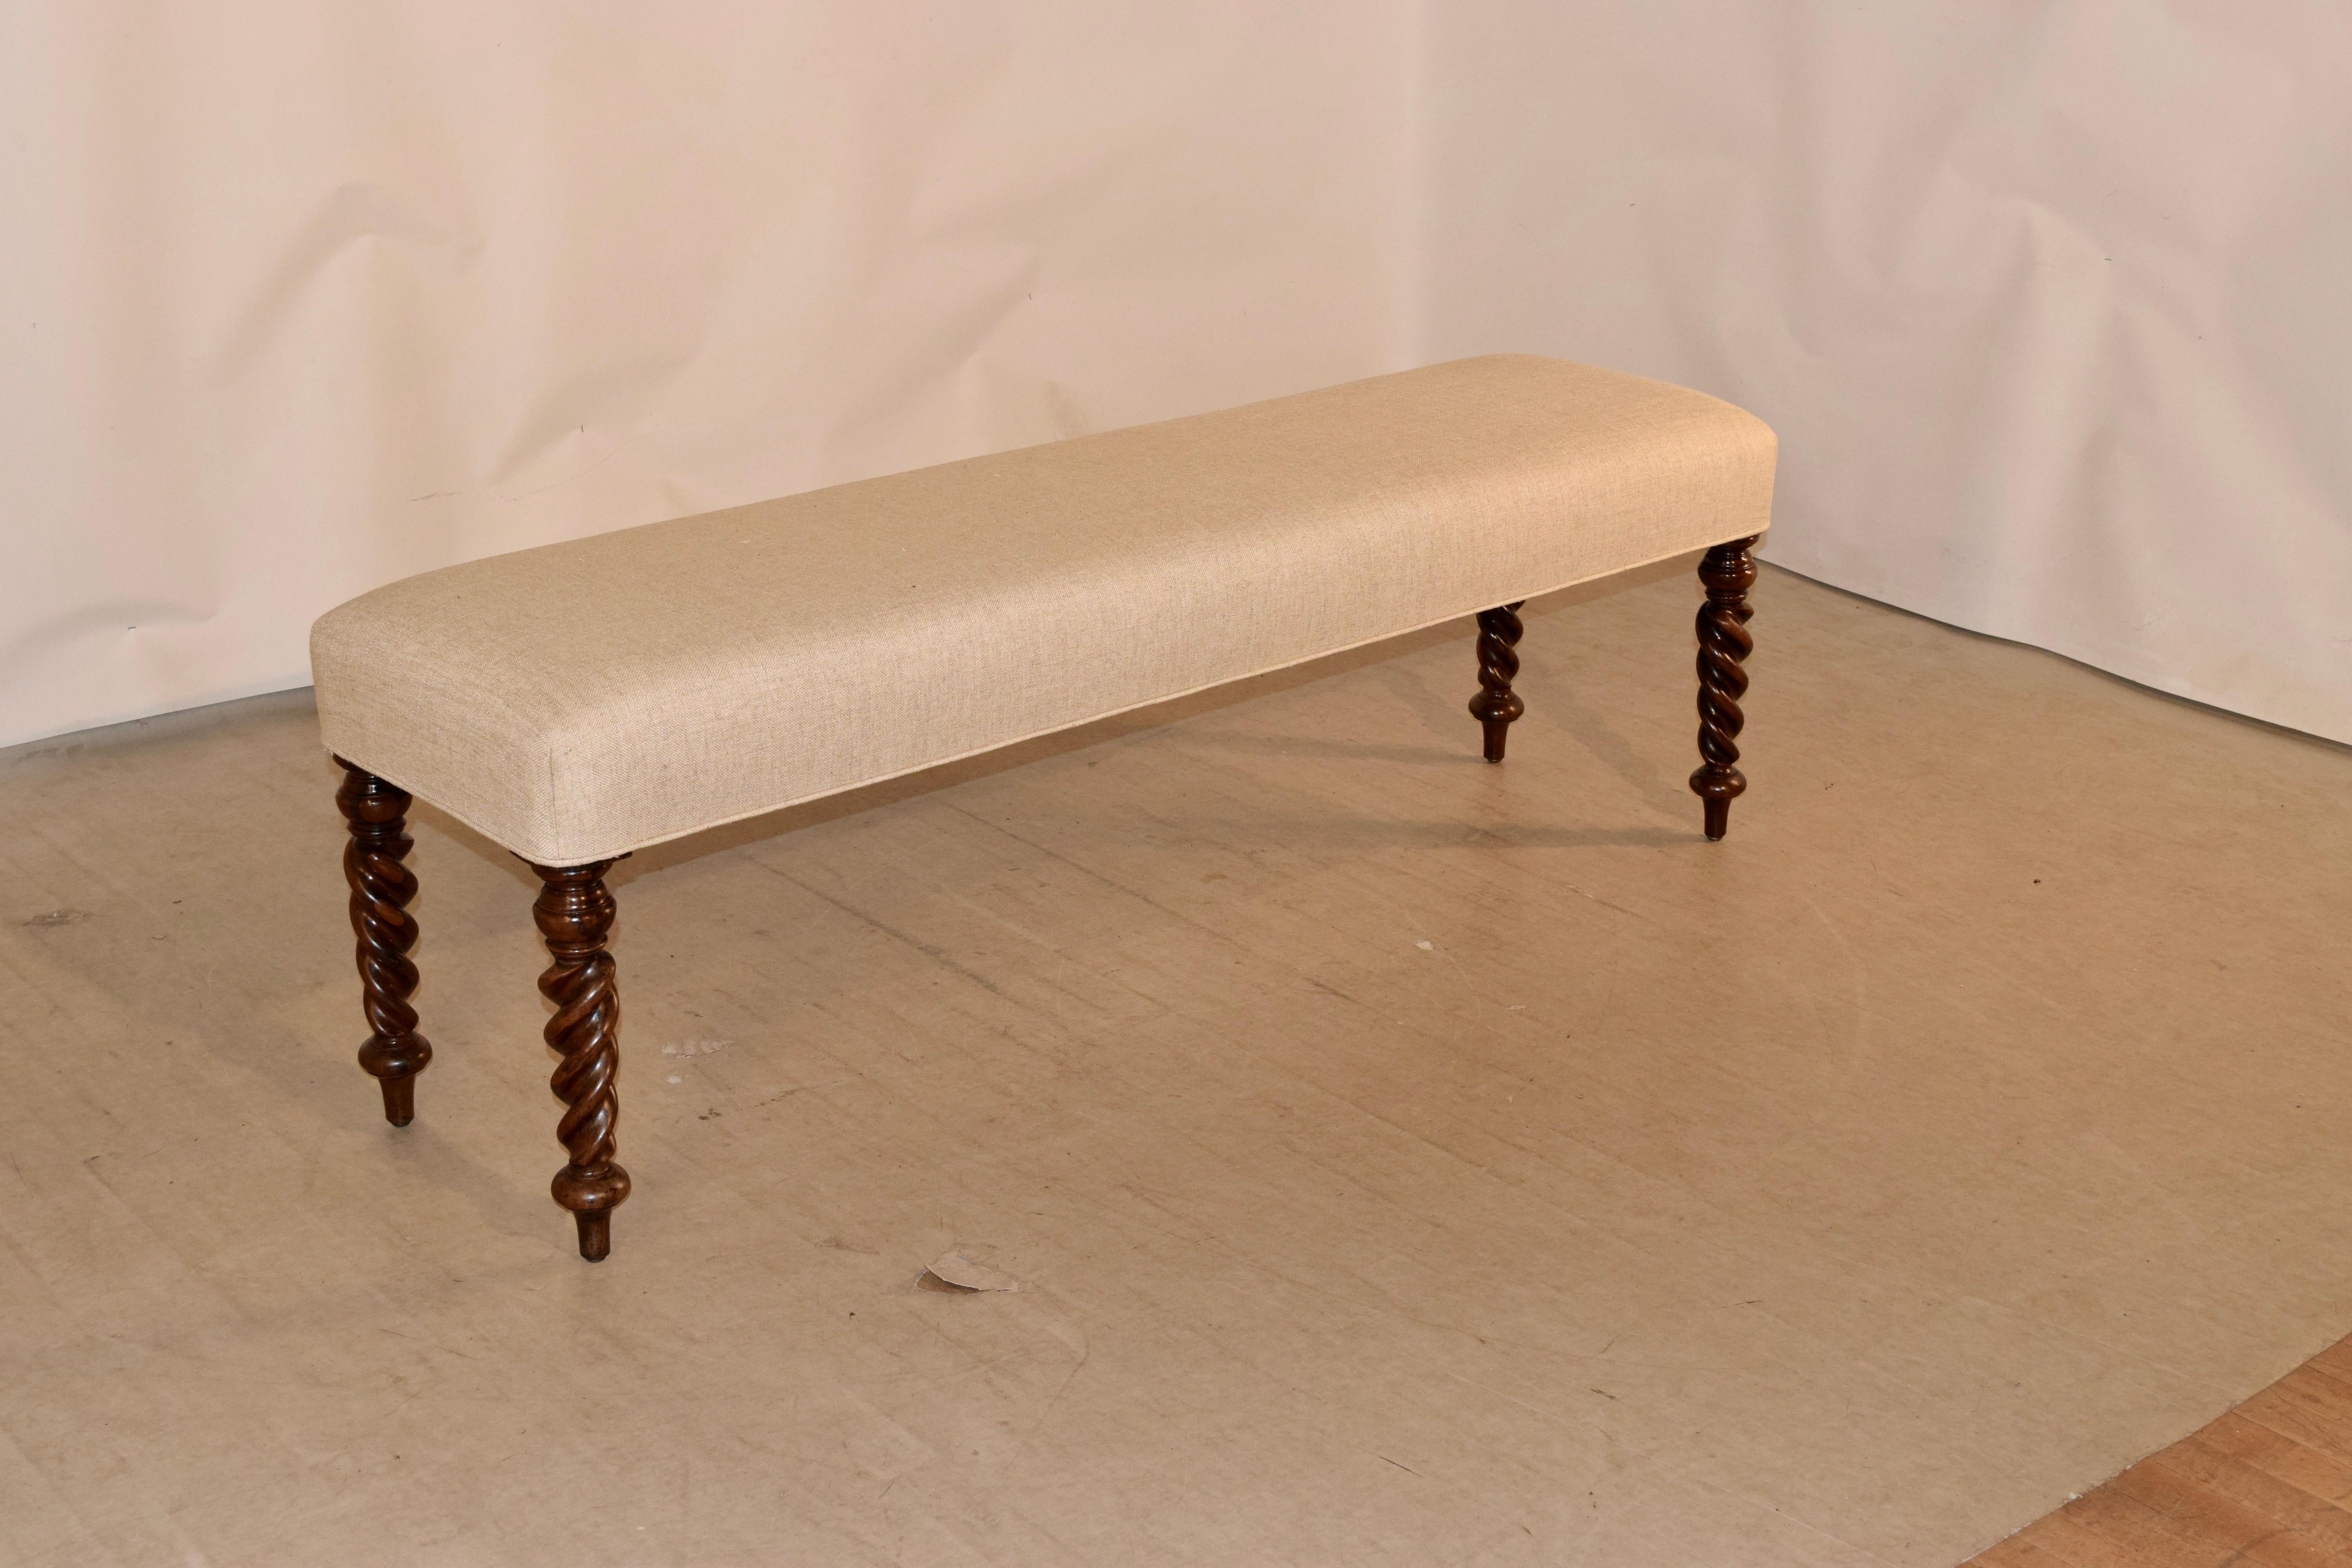 19th century upholstered bench from England with newly upholstered seat in linen finished with single welt decoration, supported upon mahogany hand-turned flame twist feet.